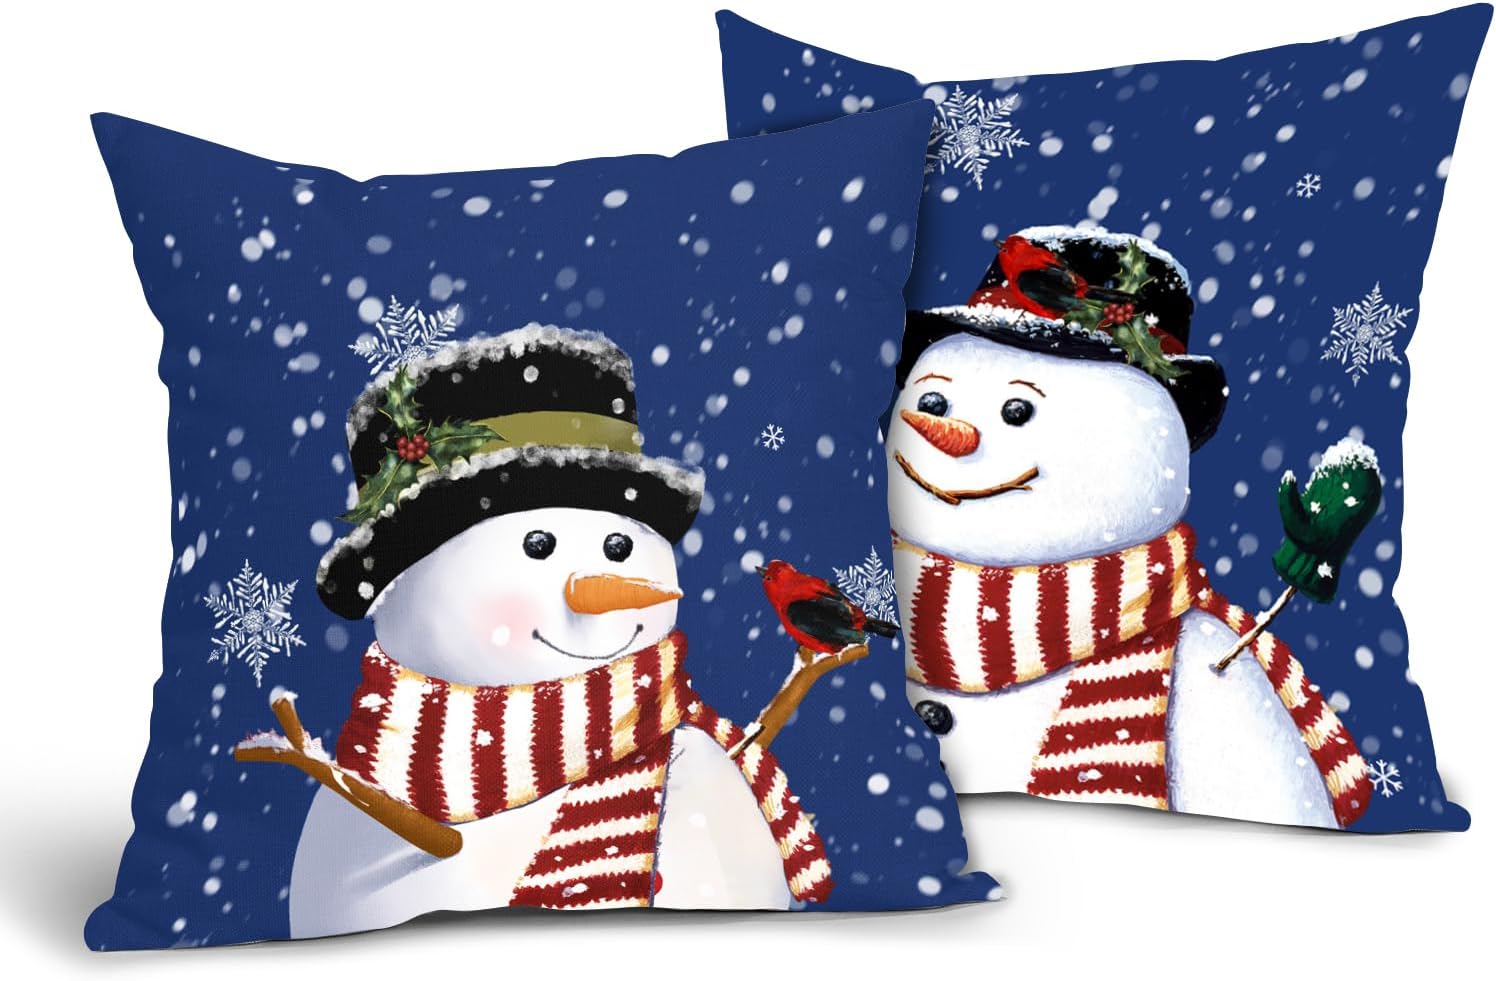 Blue Christmas Pillow Covers 18x18 Inch Set of 2 Winter Snowman Throw Pillow Covers Snowflake Square Cotton Linen Pillowscase Modern Cushion Case Decoration for Home Sofa Couch Bed Bedroom Living Room